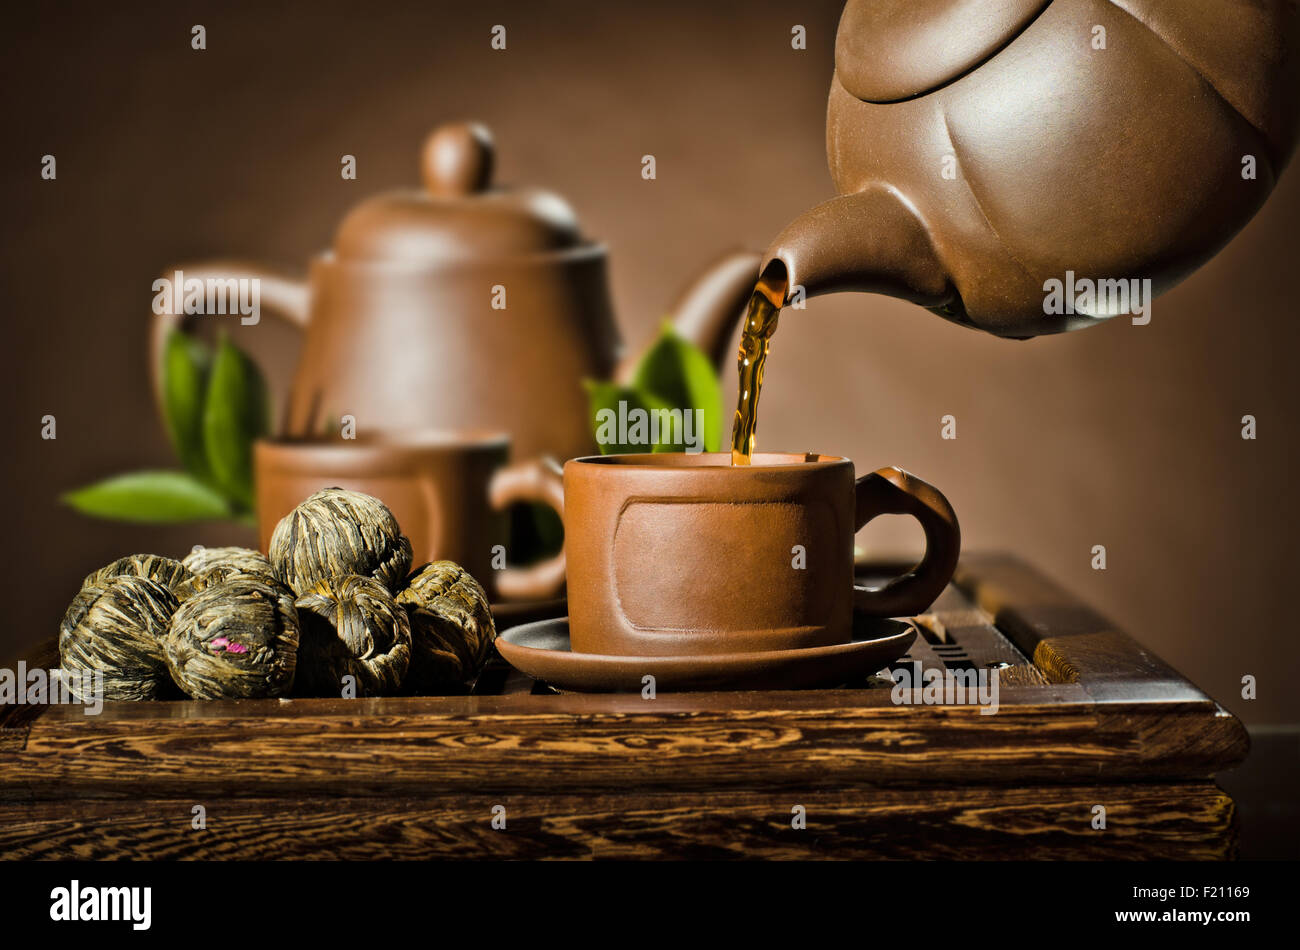 https://c8.alamy.com/comp/F21169/horizontal-photo-of-the-clay-teapot-tea-flow-in-cup-on-brown-background-F21169.jpg